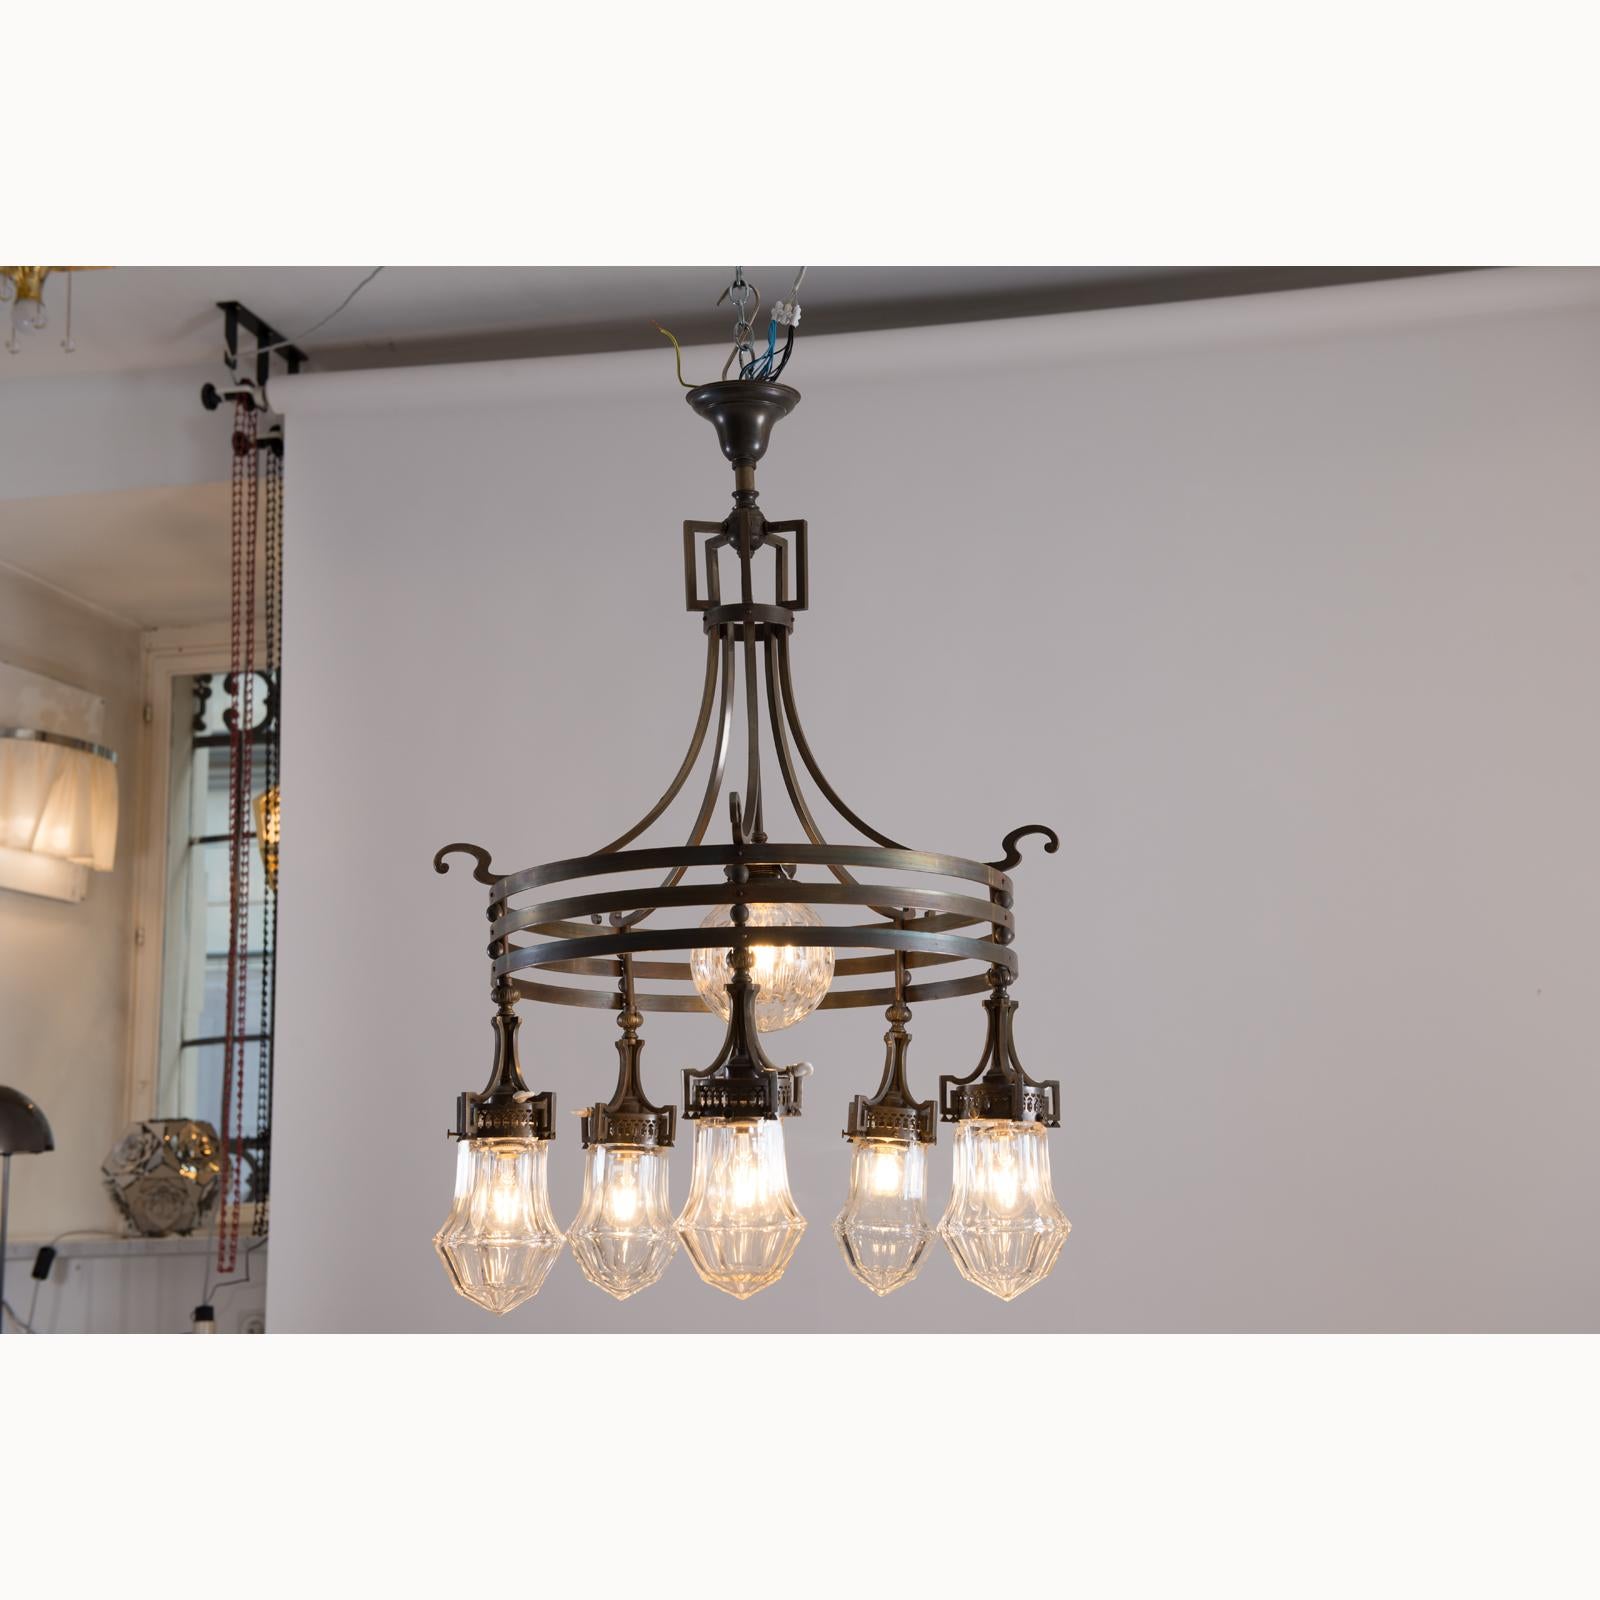 A modernist Jugendstil chandelier with simple ornaments, patinated brass.
Total drop can be customized.